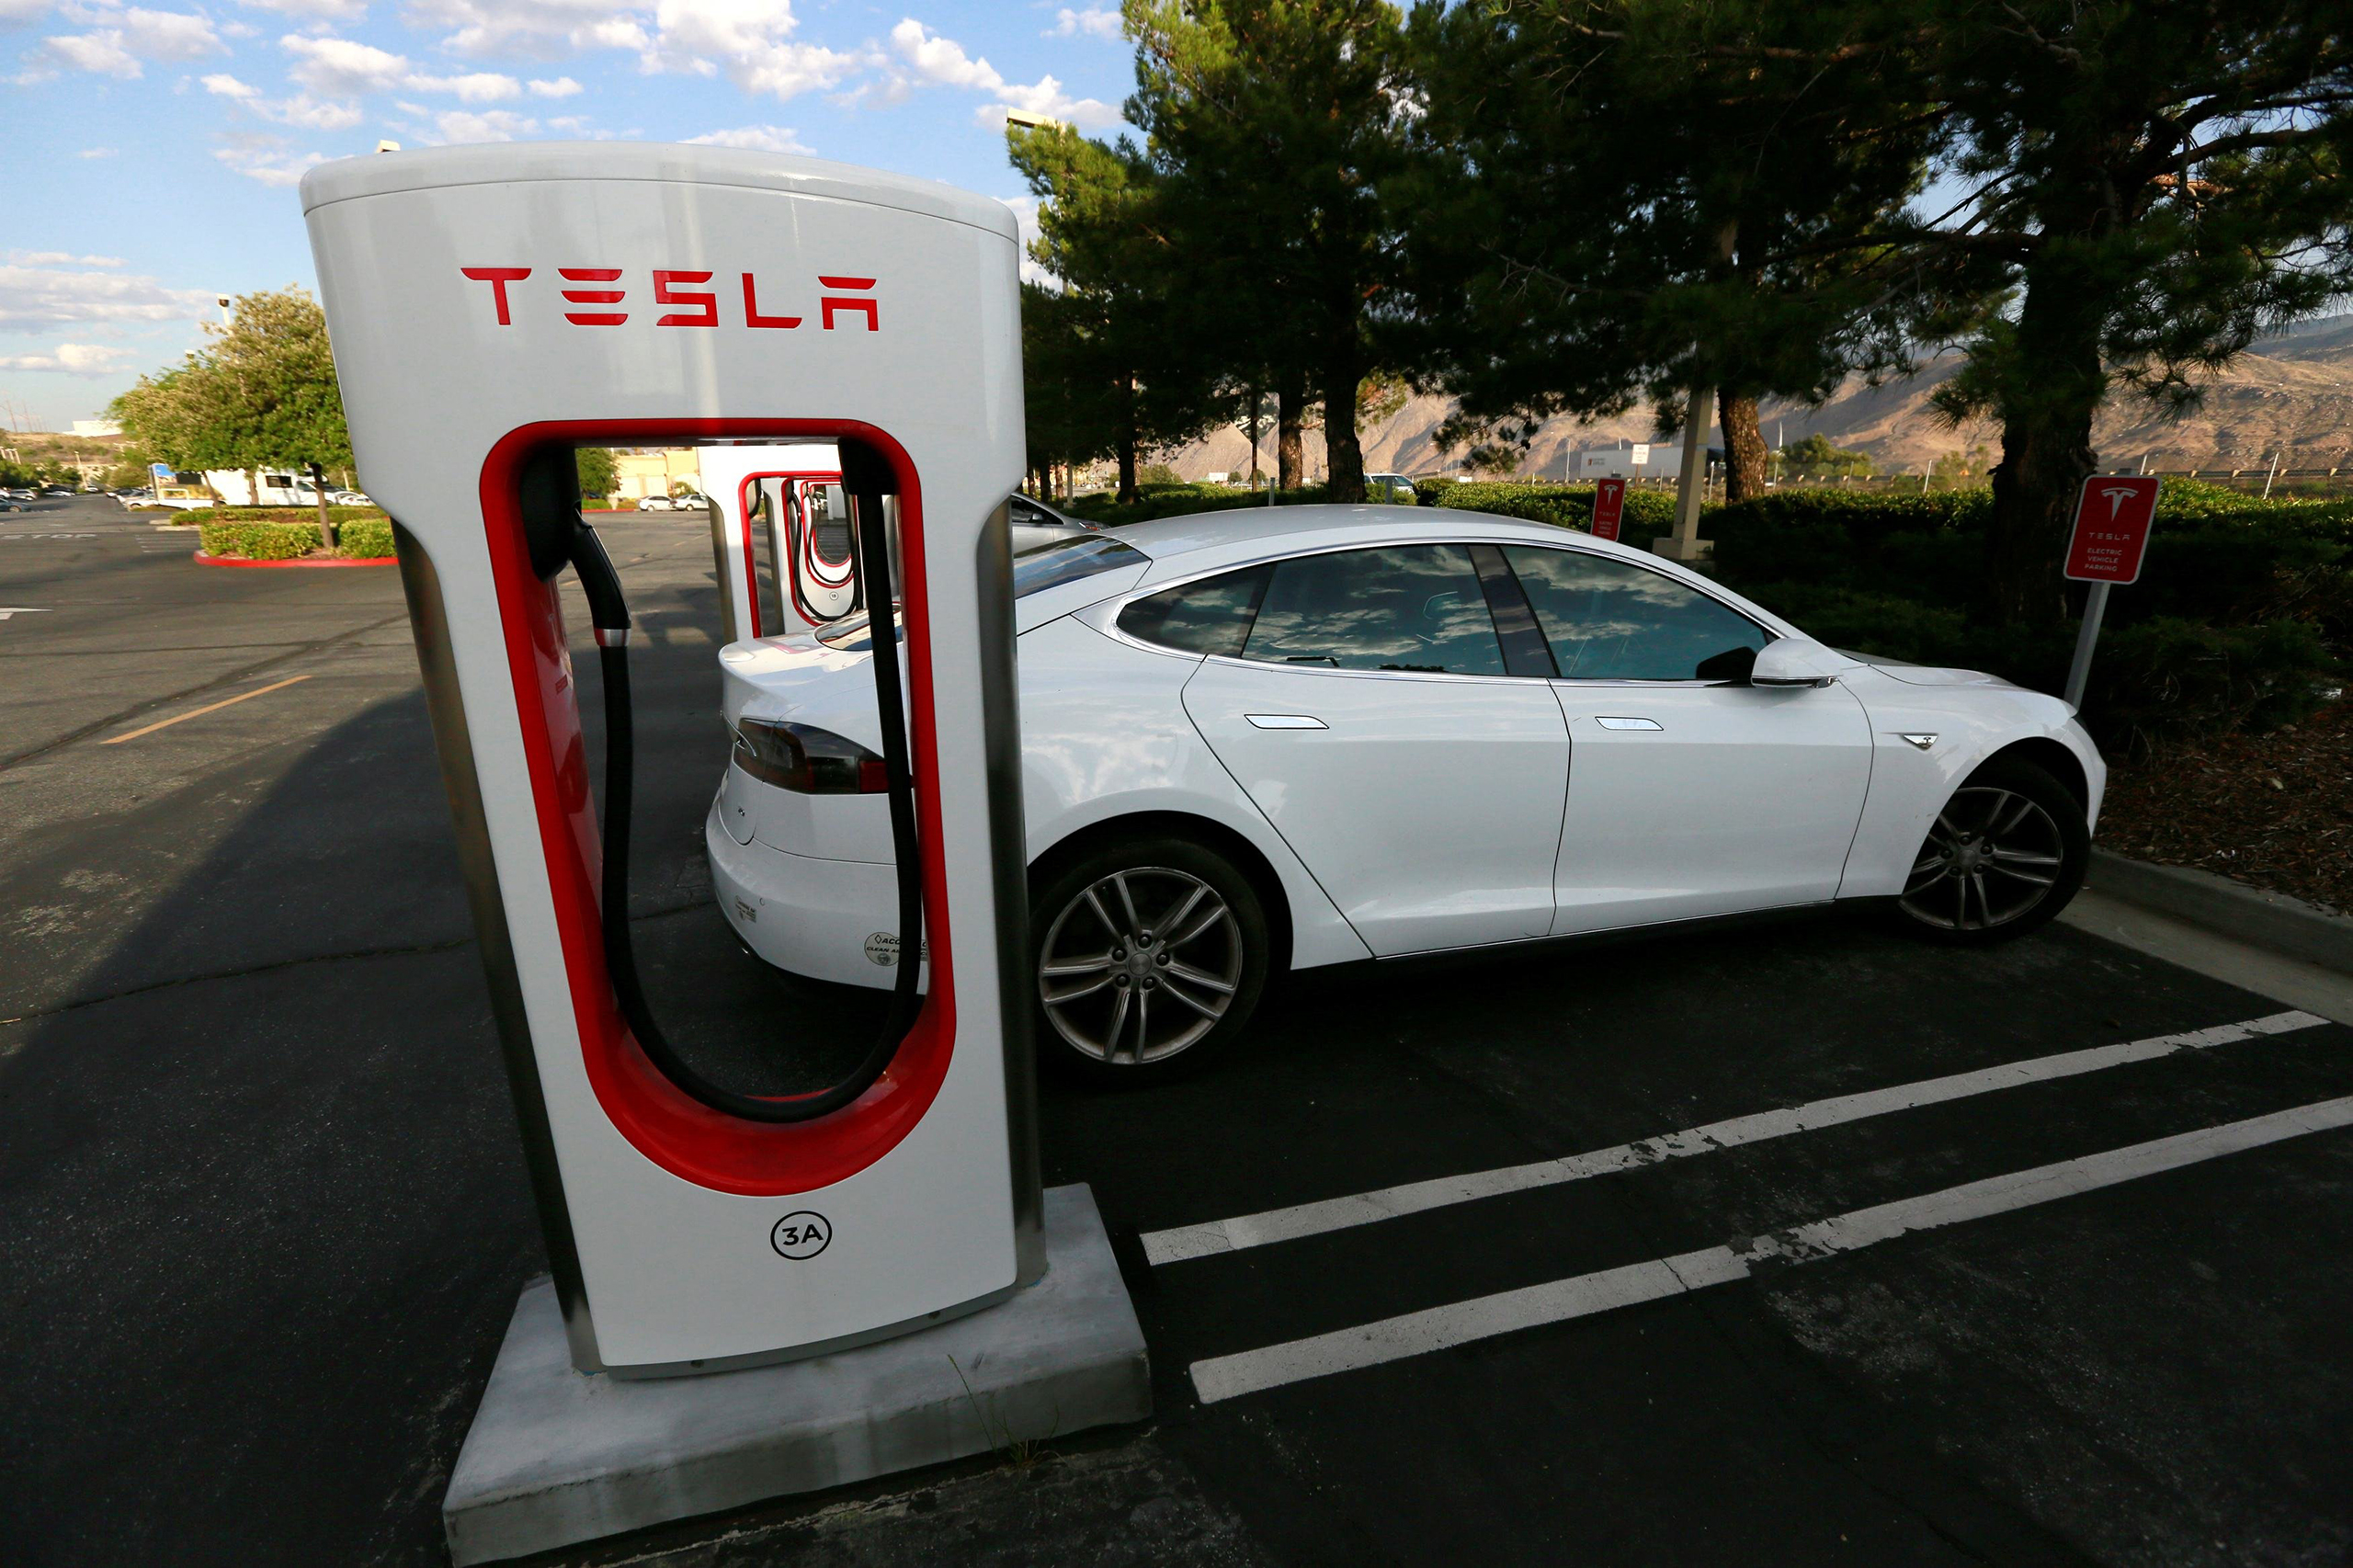 A Tesla Model S charges at a Tesla Supercharger station in Cabazon, Calif., May 18, 2016. (Sam Mircovich—Reuters)